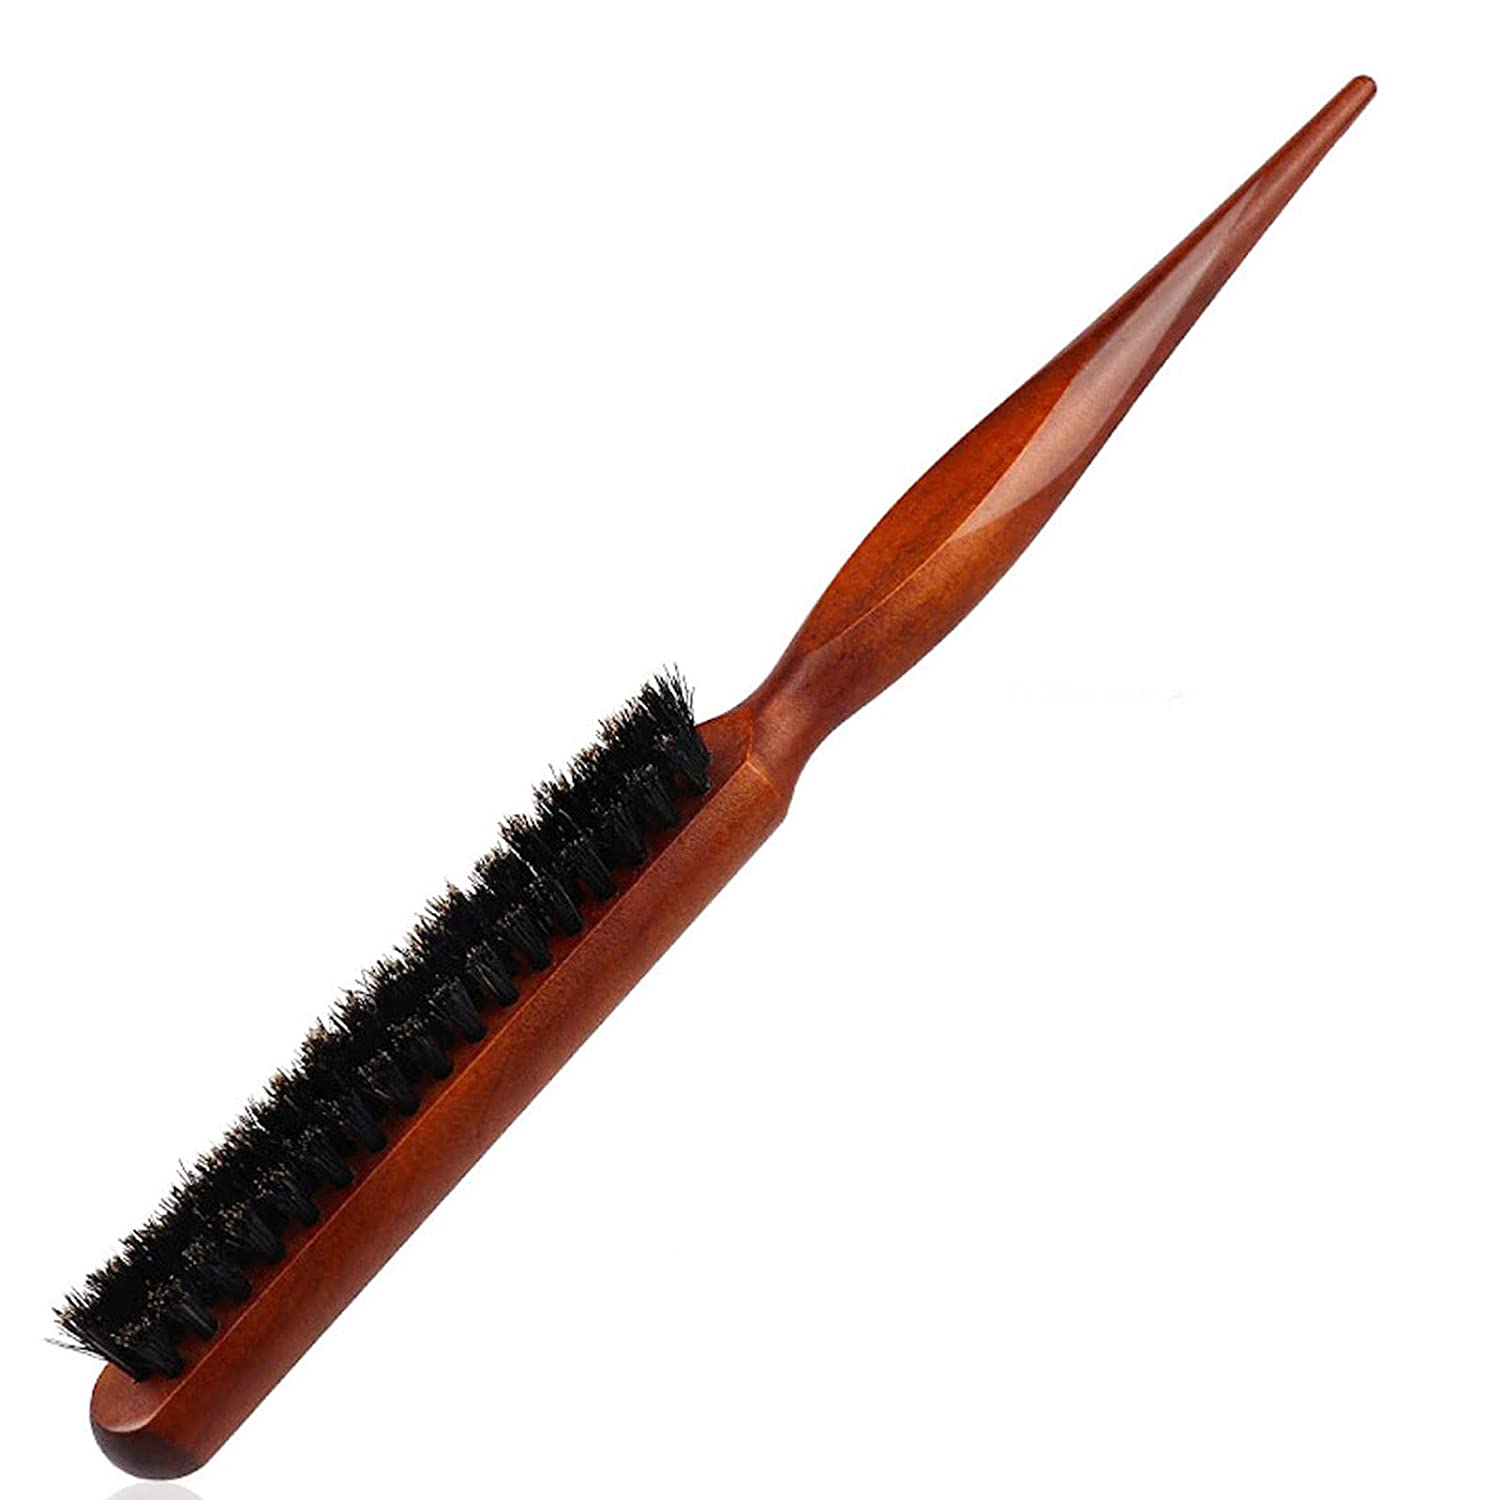 1 x Boar Bristle Brush, Hair Brush Made of Beech Wood, Topping Brush, Professional Salon Comb for Long, Thick, Curly, Wavy, Dry or Damaged Hair